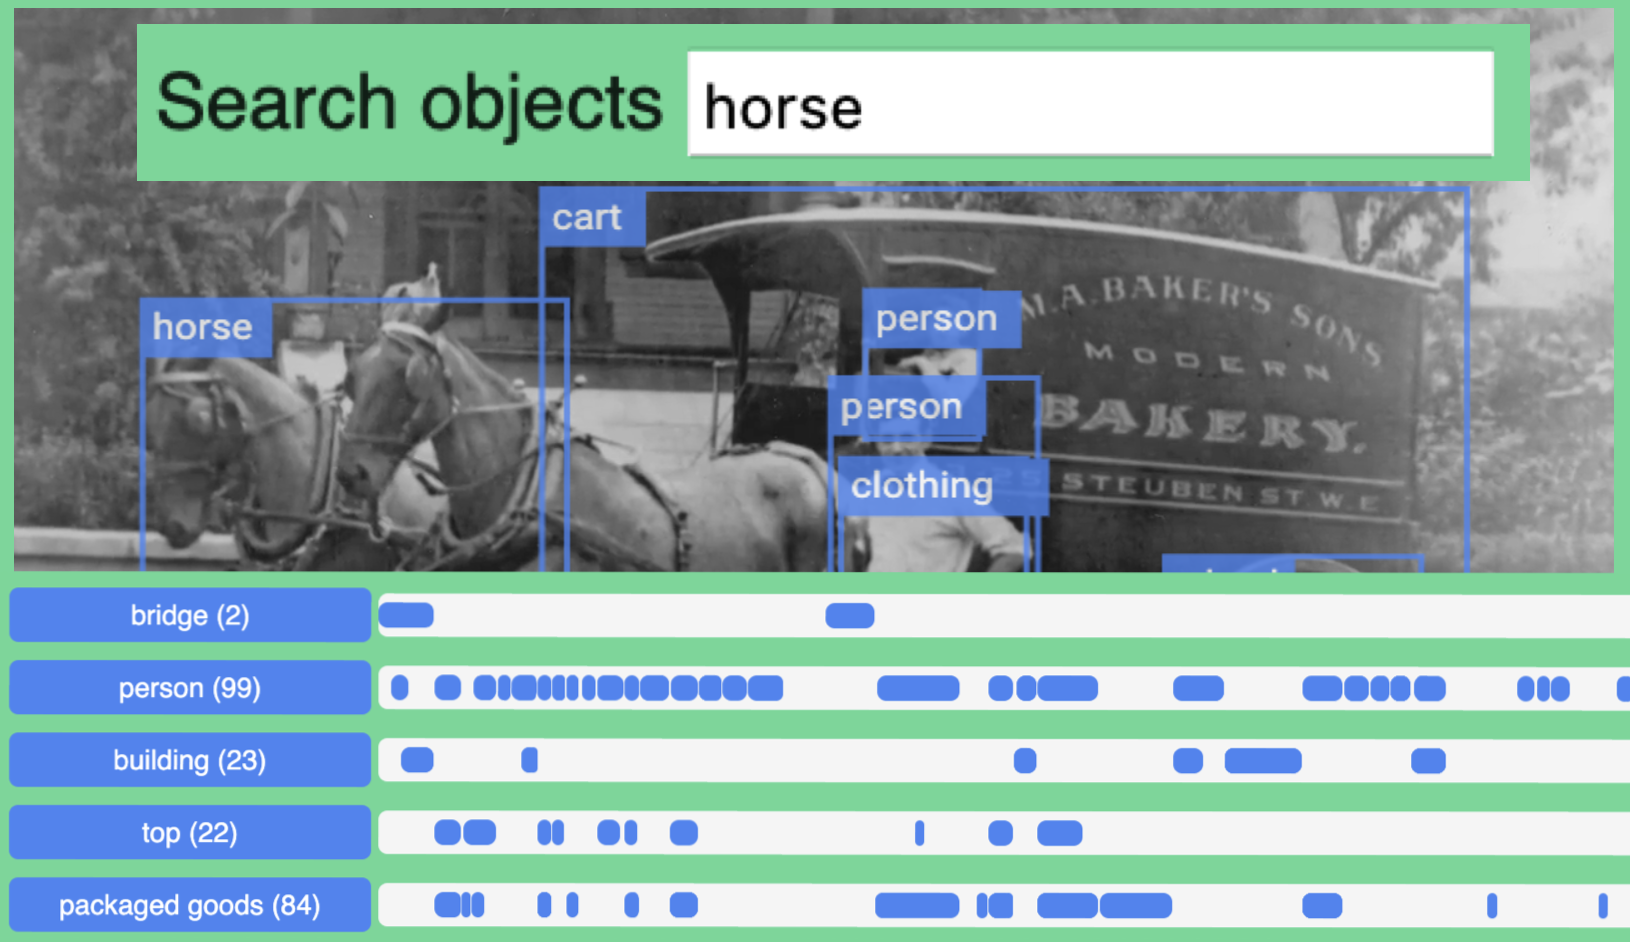 Object detection and search capability